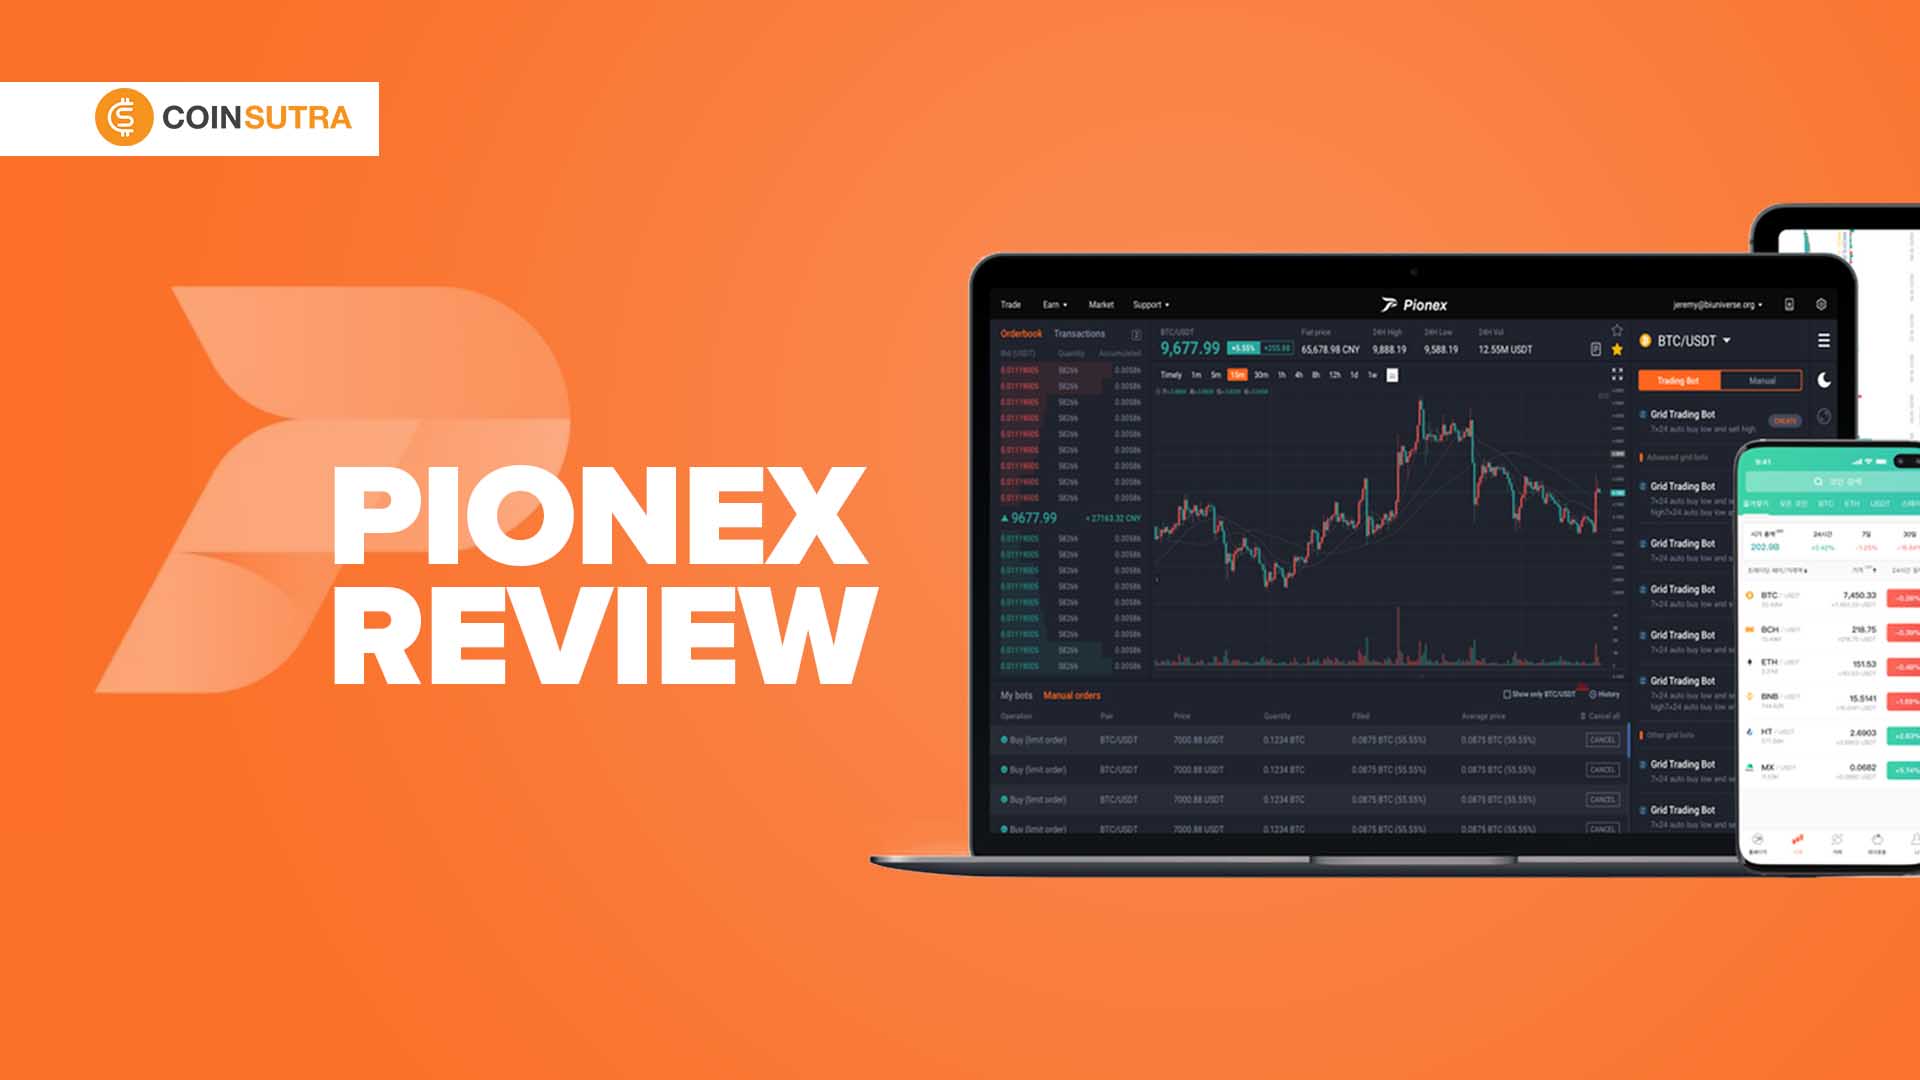 Pionex Review 2022: Is it Legit, or a Scam? | Signup Now!